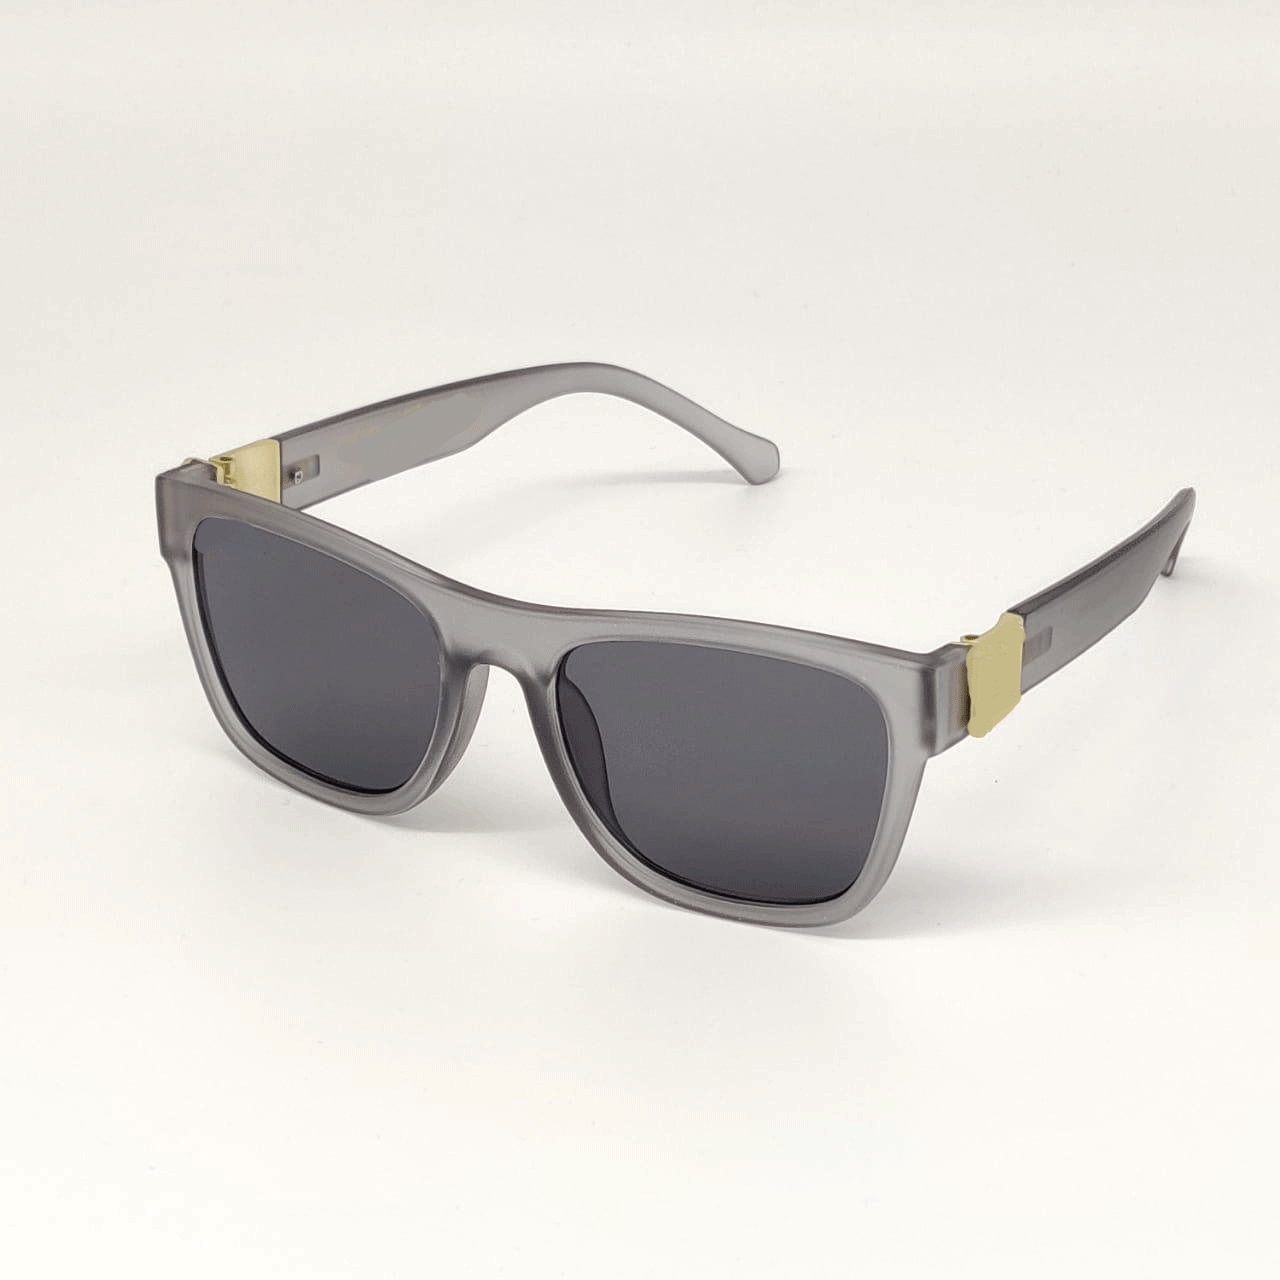 Modern Square Style Vintage Gradient Sunglasses For Men And Women-Unique and Classy